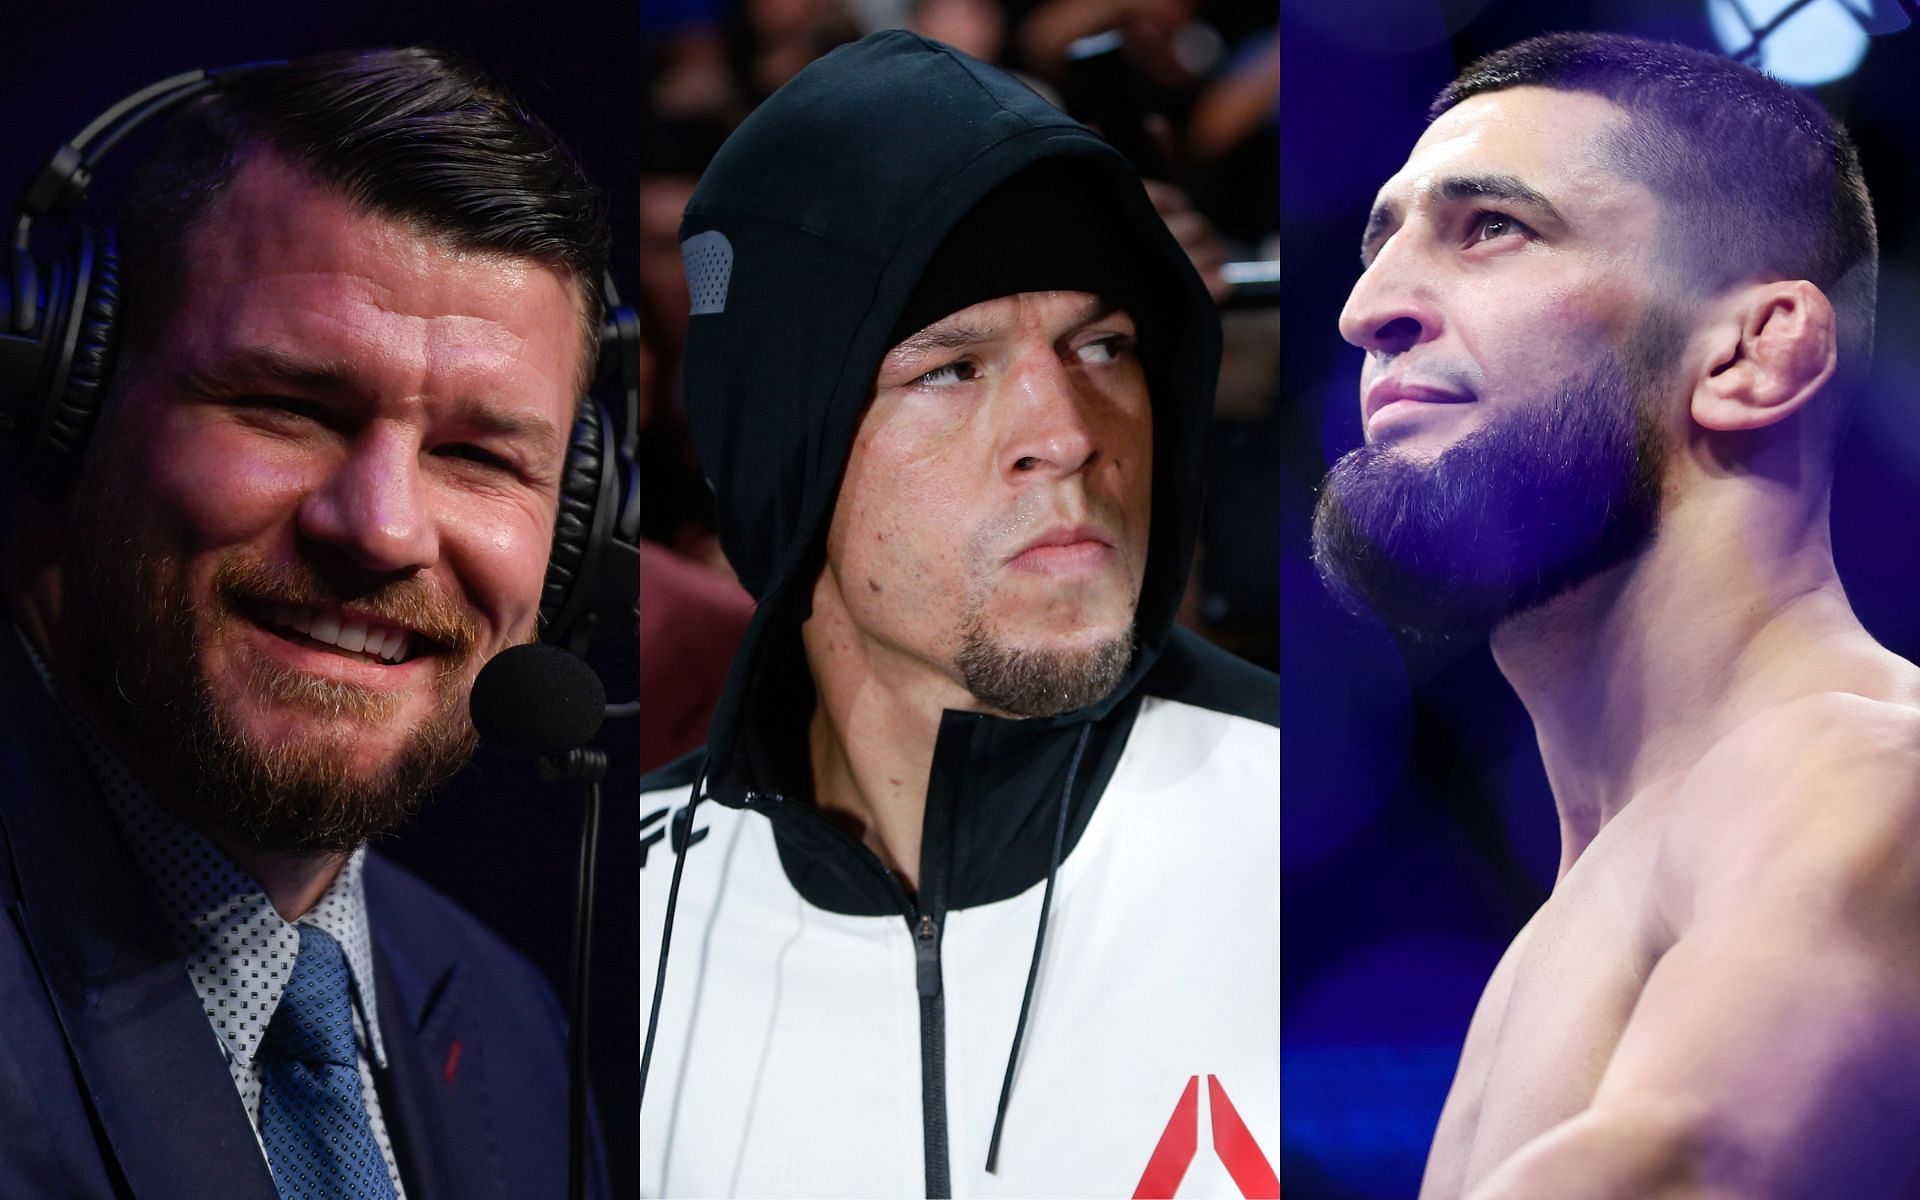 From left to right: Michael Bisping, Nate Diaz, and Khamzat Chimaev